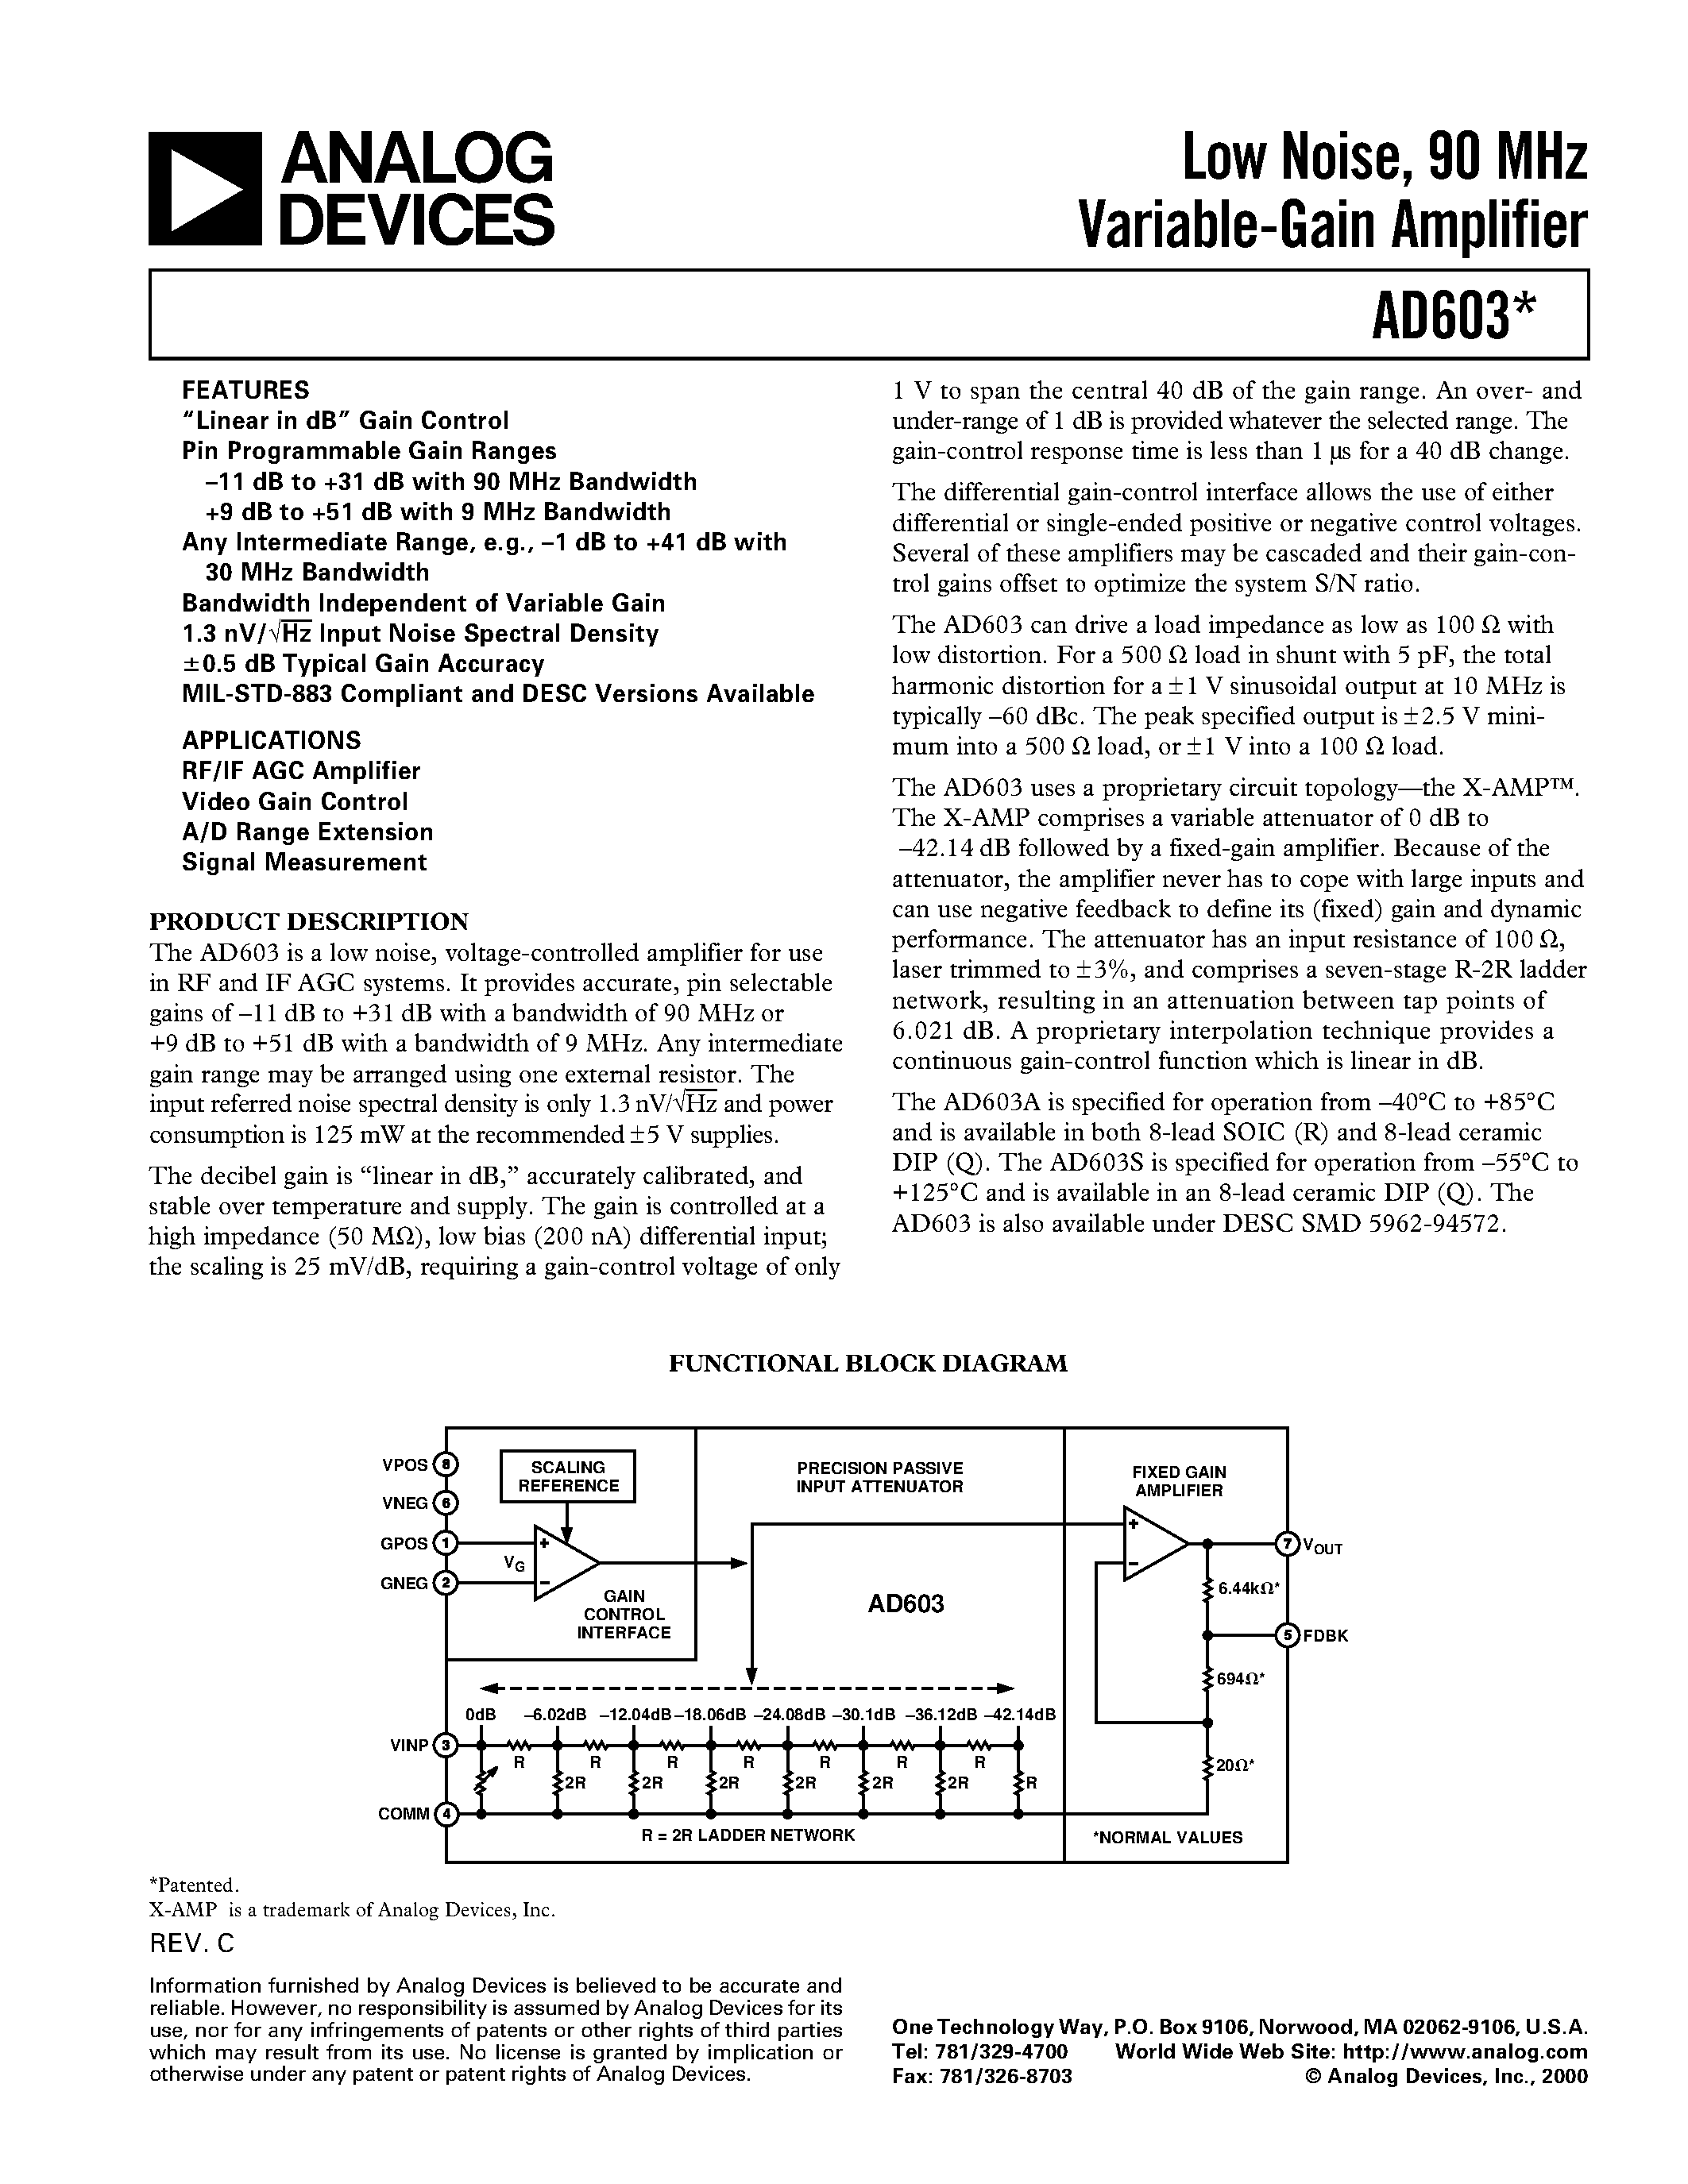 Datasheet AD603AR-REEL - Low Noise/ 90 MHz Variable-Gain Amplifier page 1